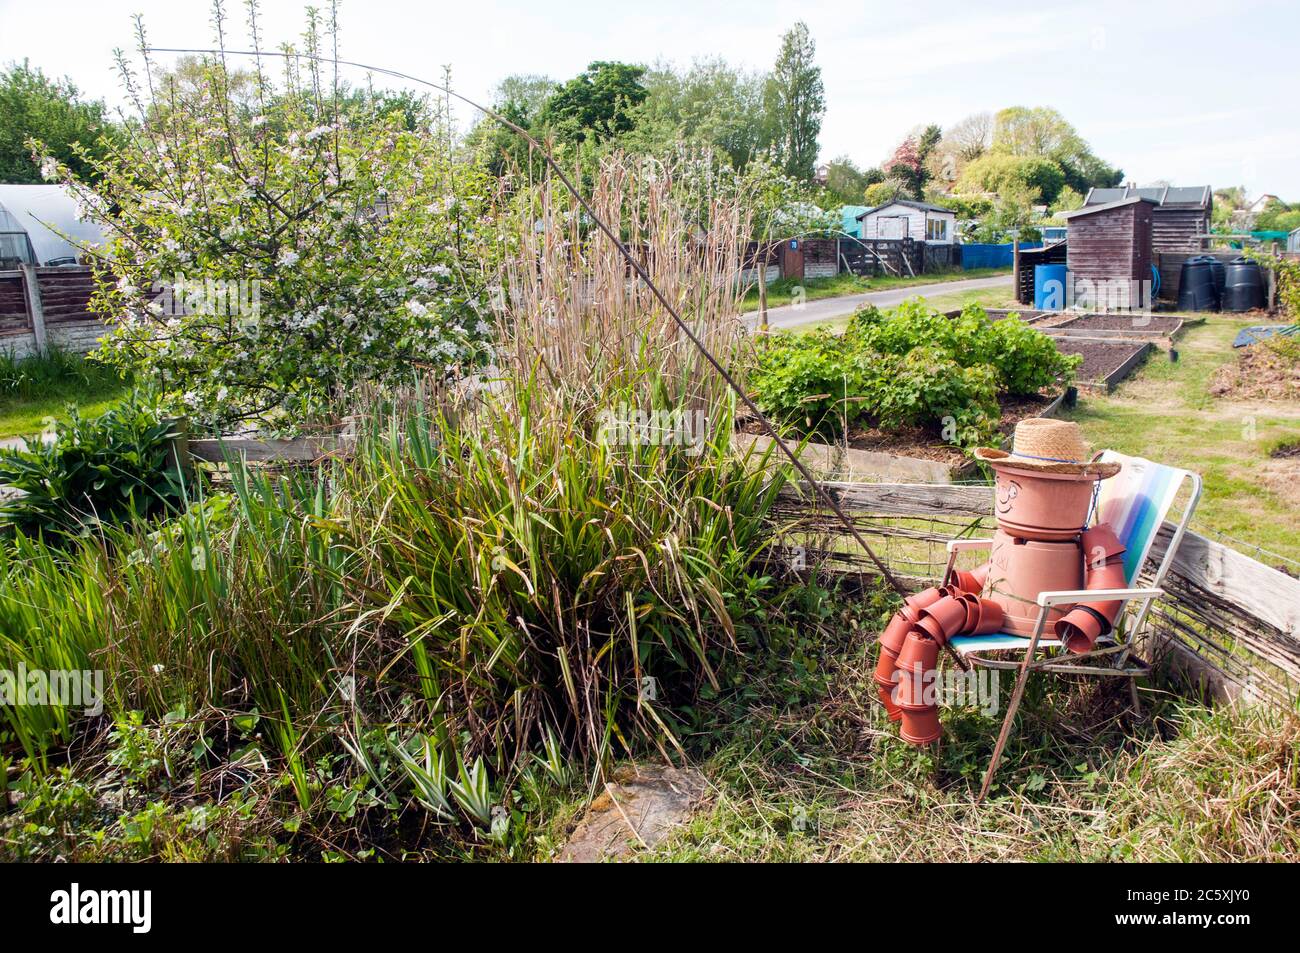 Plantpot man on an allotment site sitting on a chair with fishing rod by an overgrown pond. All of the figure is made from different sized plant pots Stock Photo